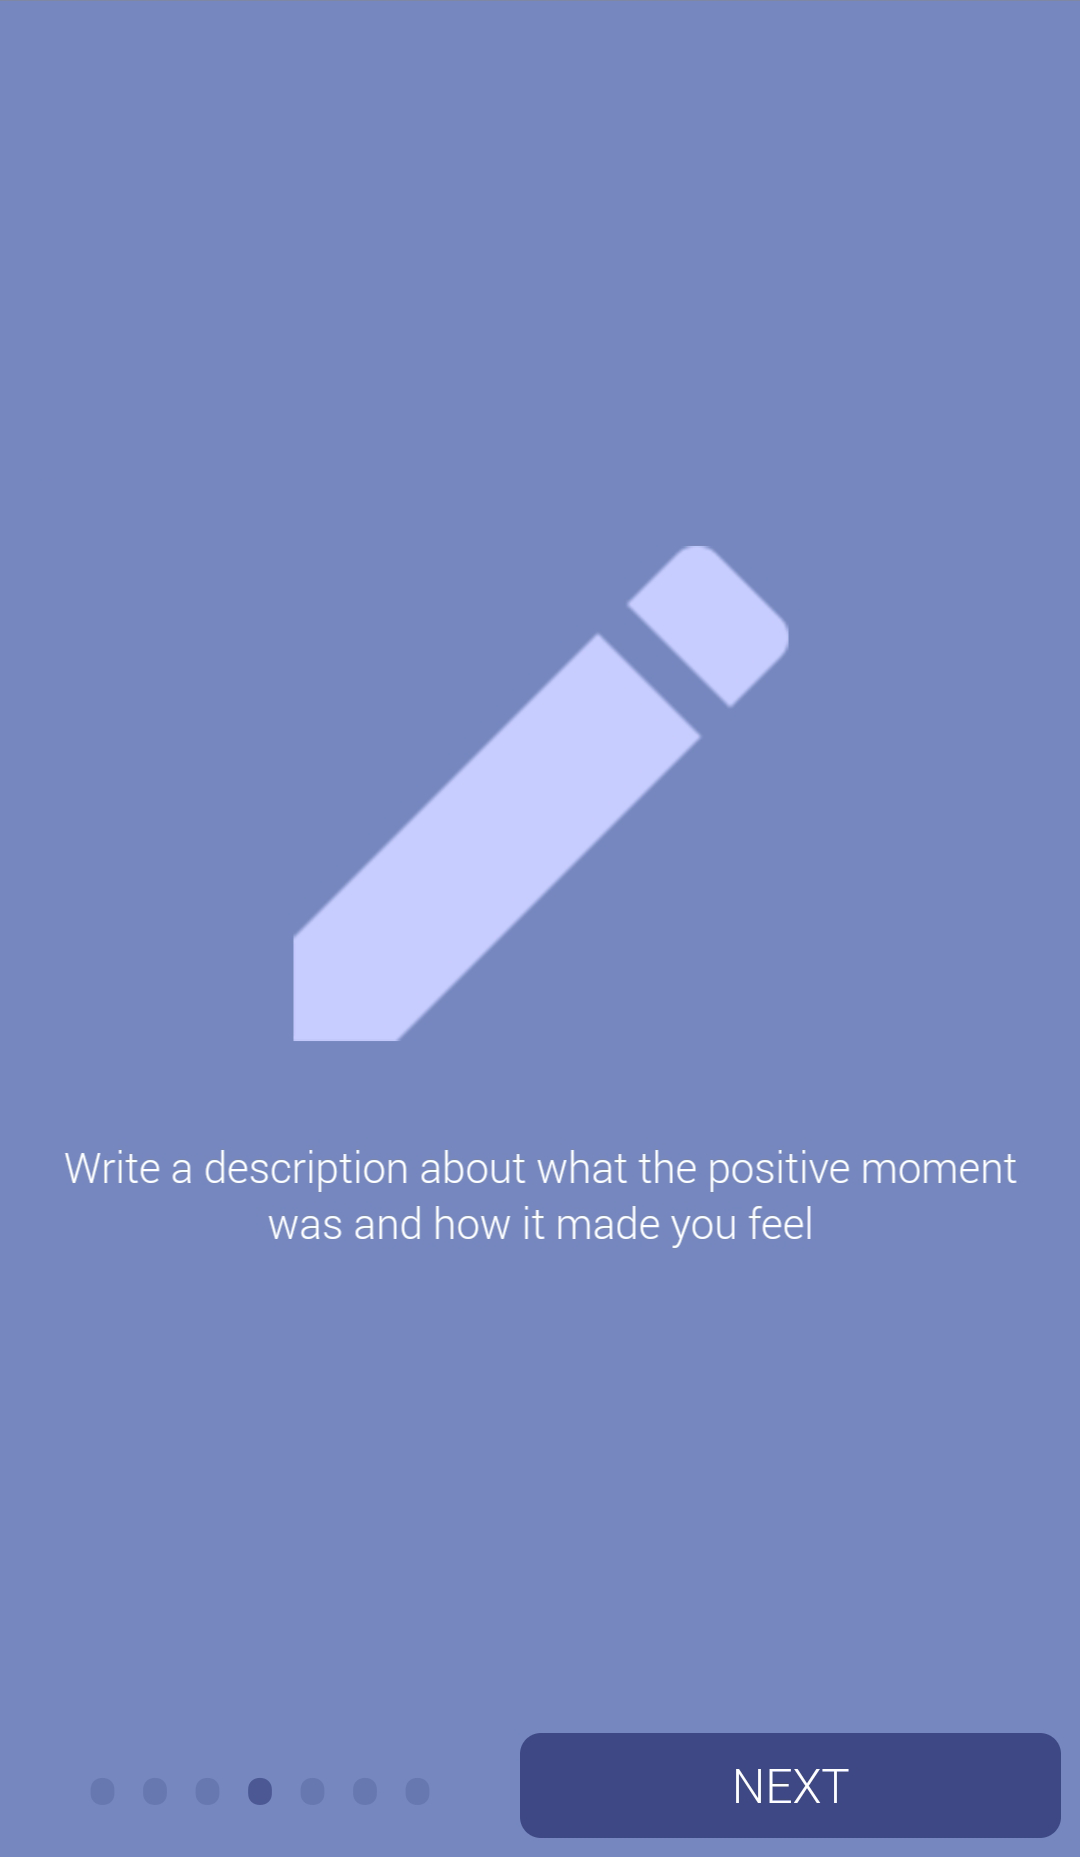 Onboarding screen with text: 'Write a description about what the positive moment was and how it made you feel'.